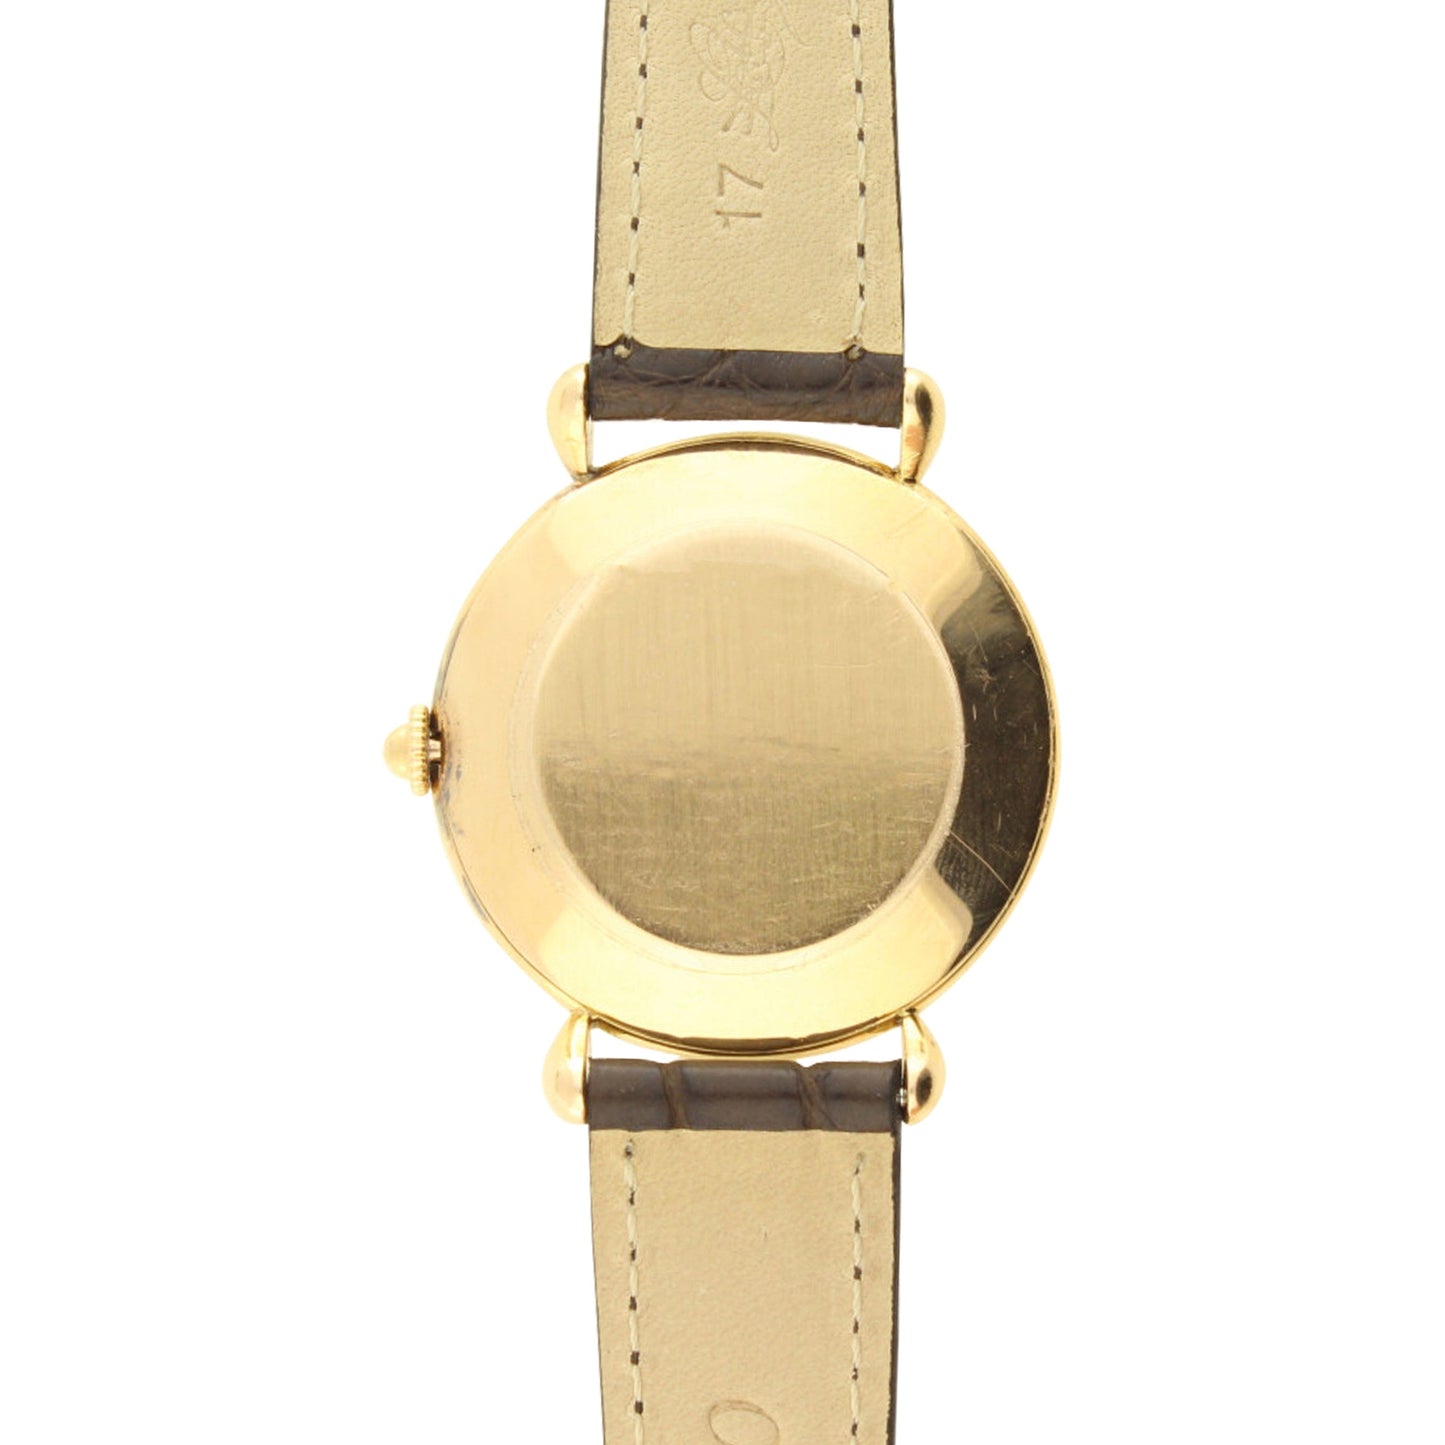 18ct rose gold, reference 4126 wristwatch. Made 1940